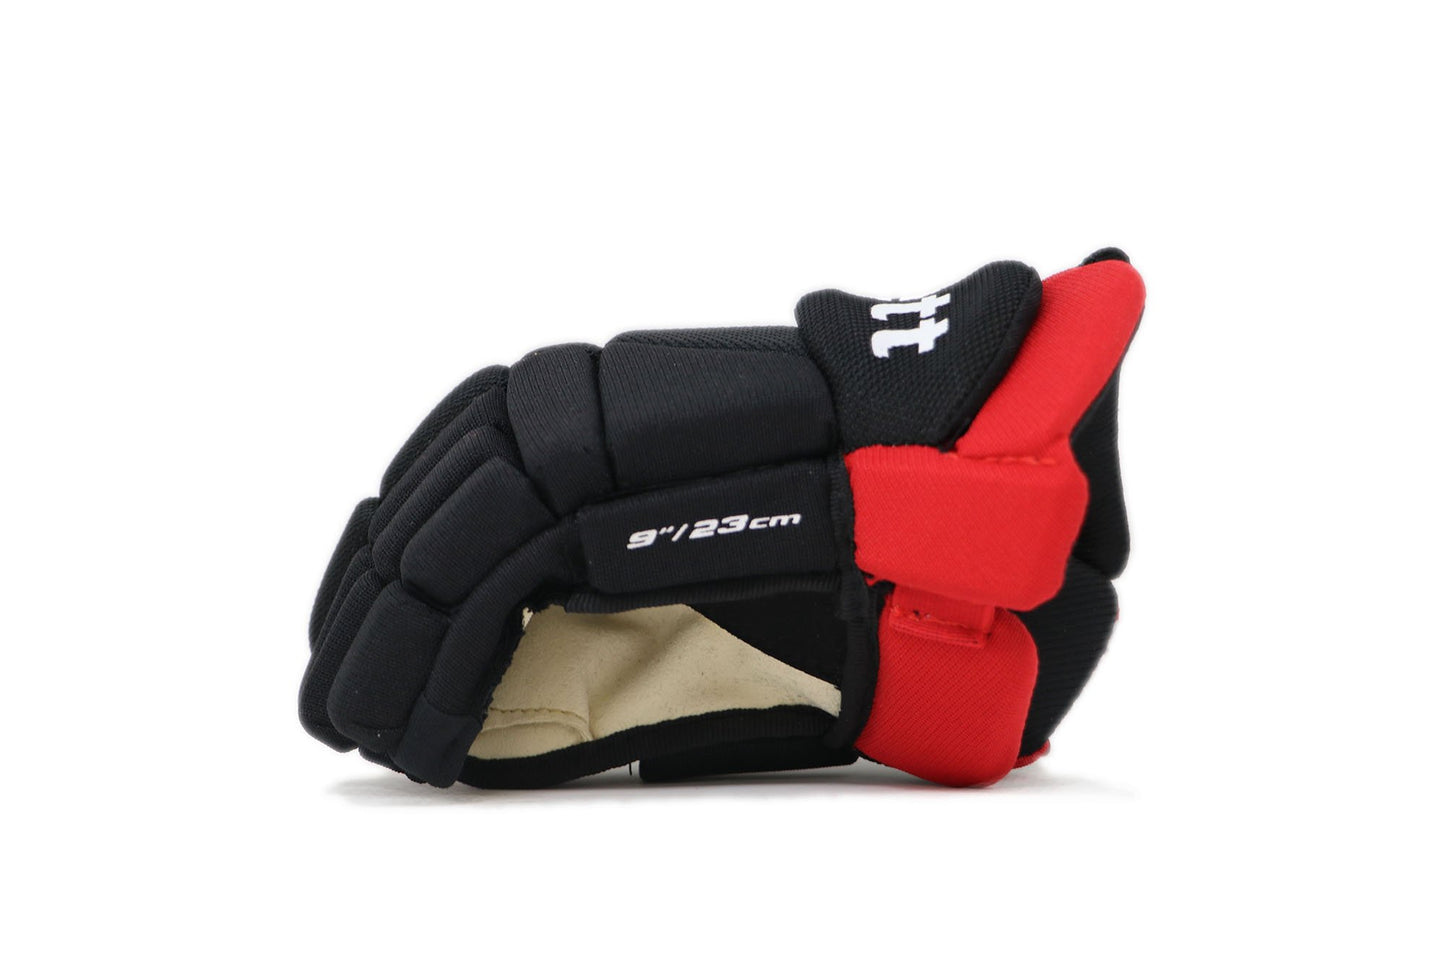 B-5 Competition Ice Hockey gloves